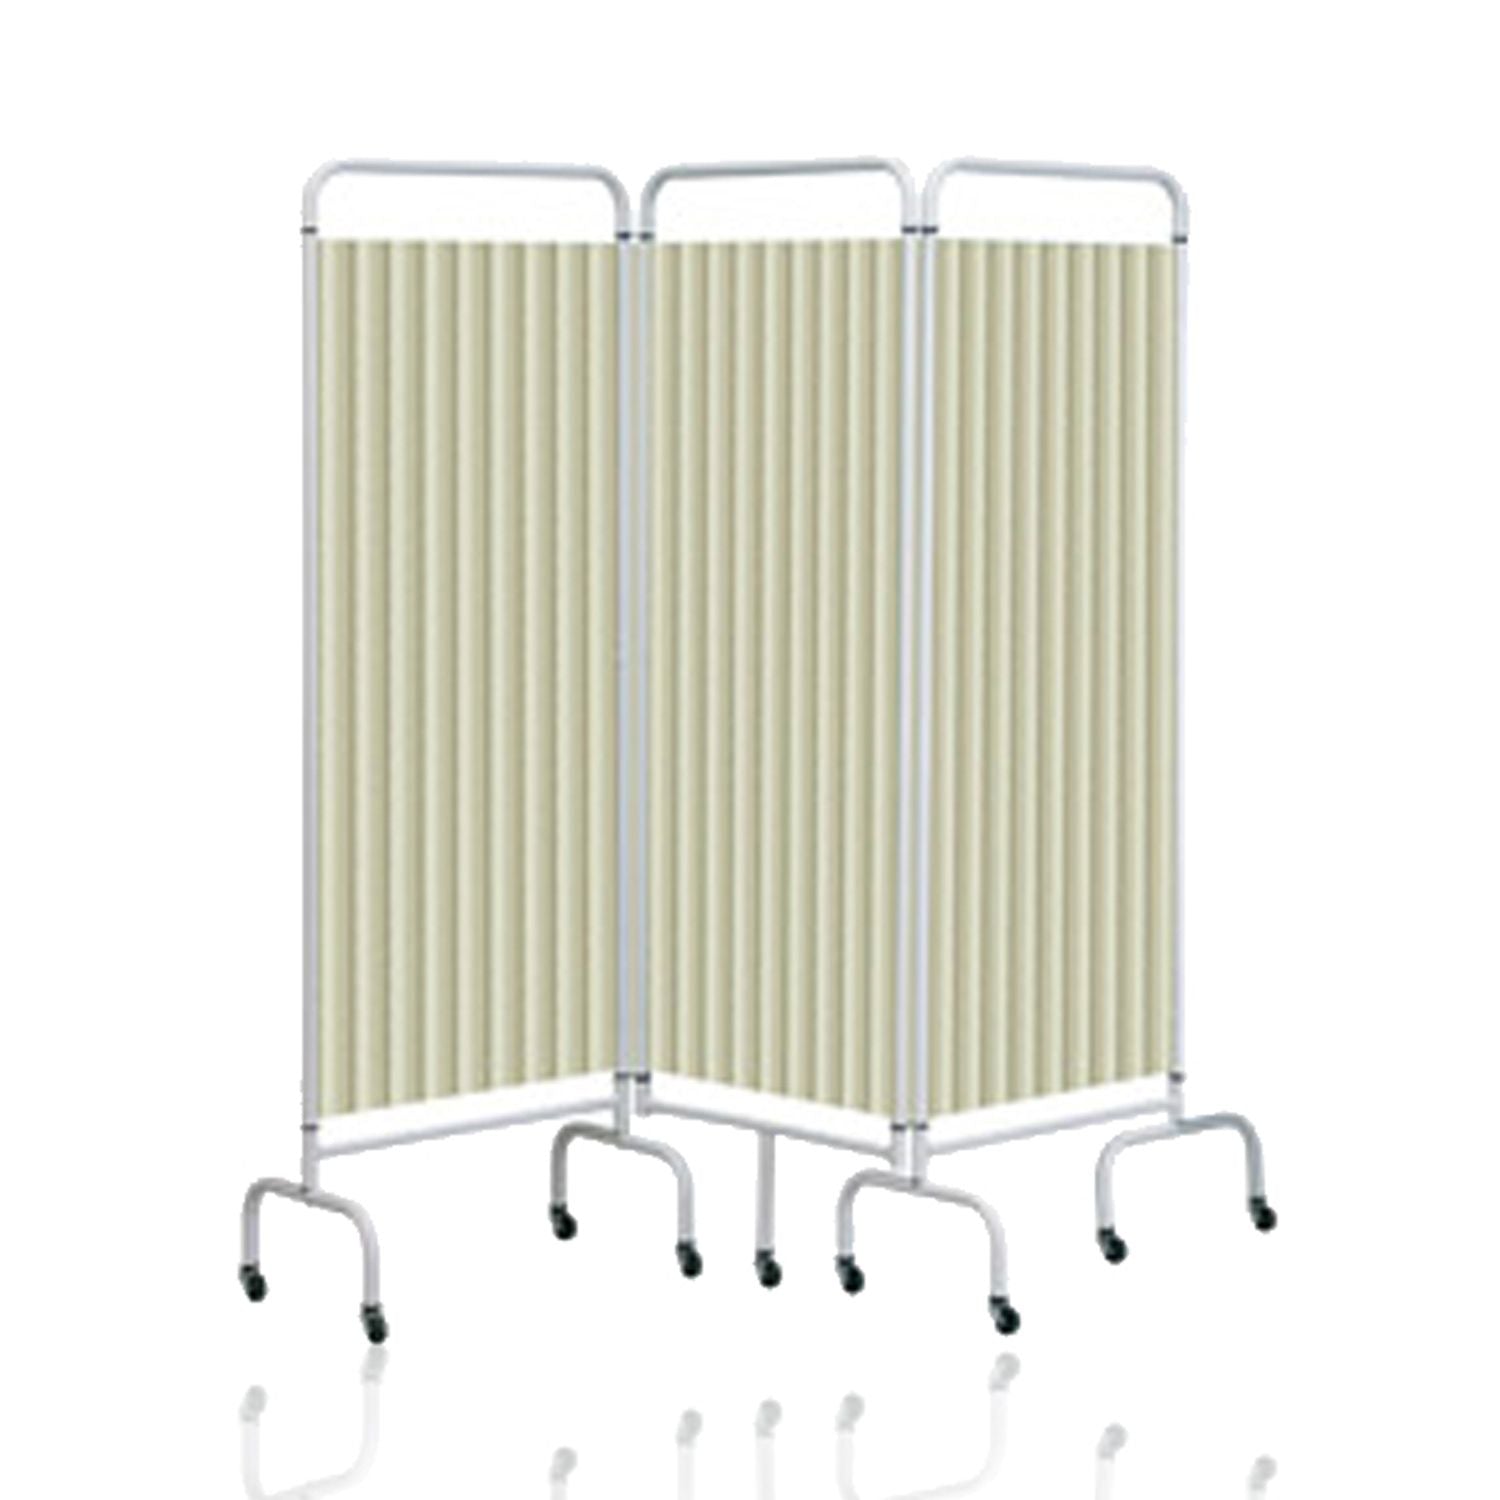 Sunflower 3 Section Mobile Folding Screen with Hygienic Disposable Curtains (8)